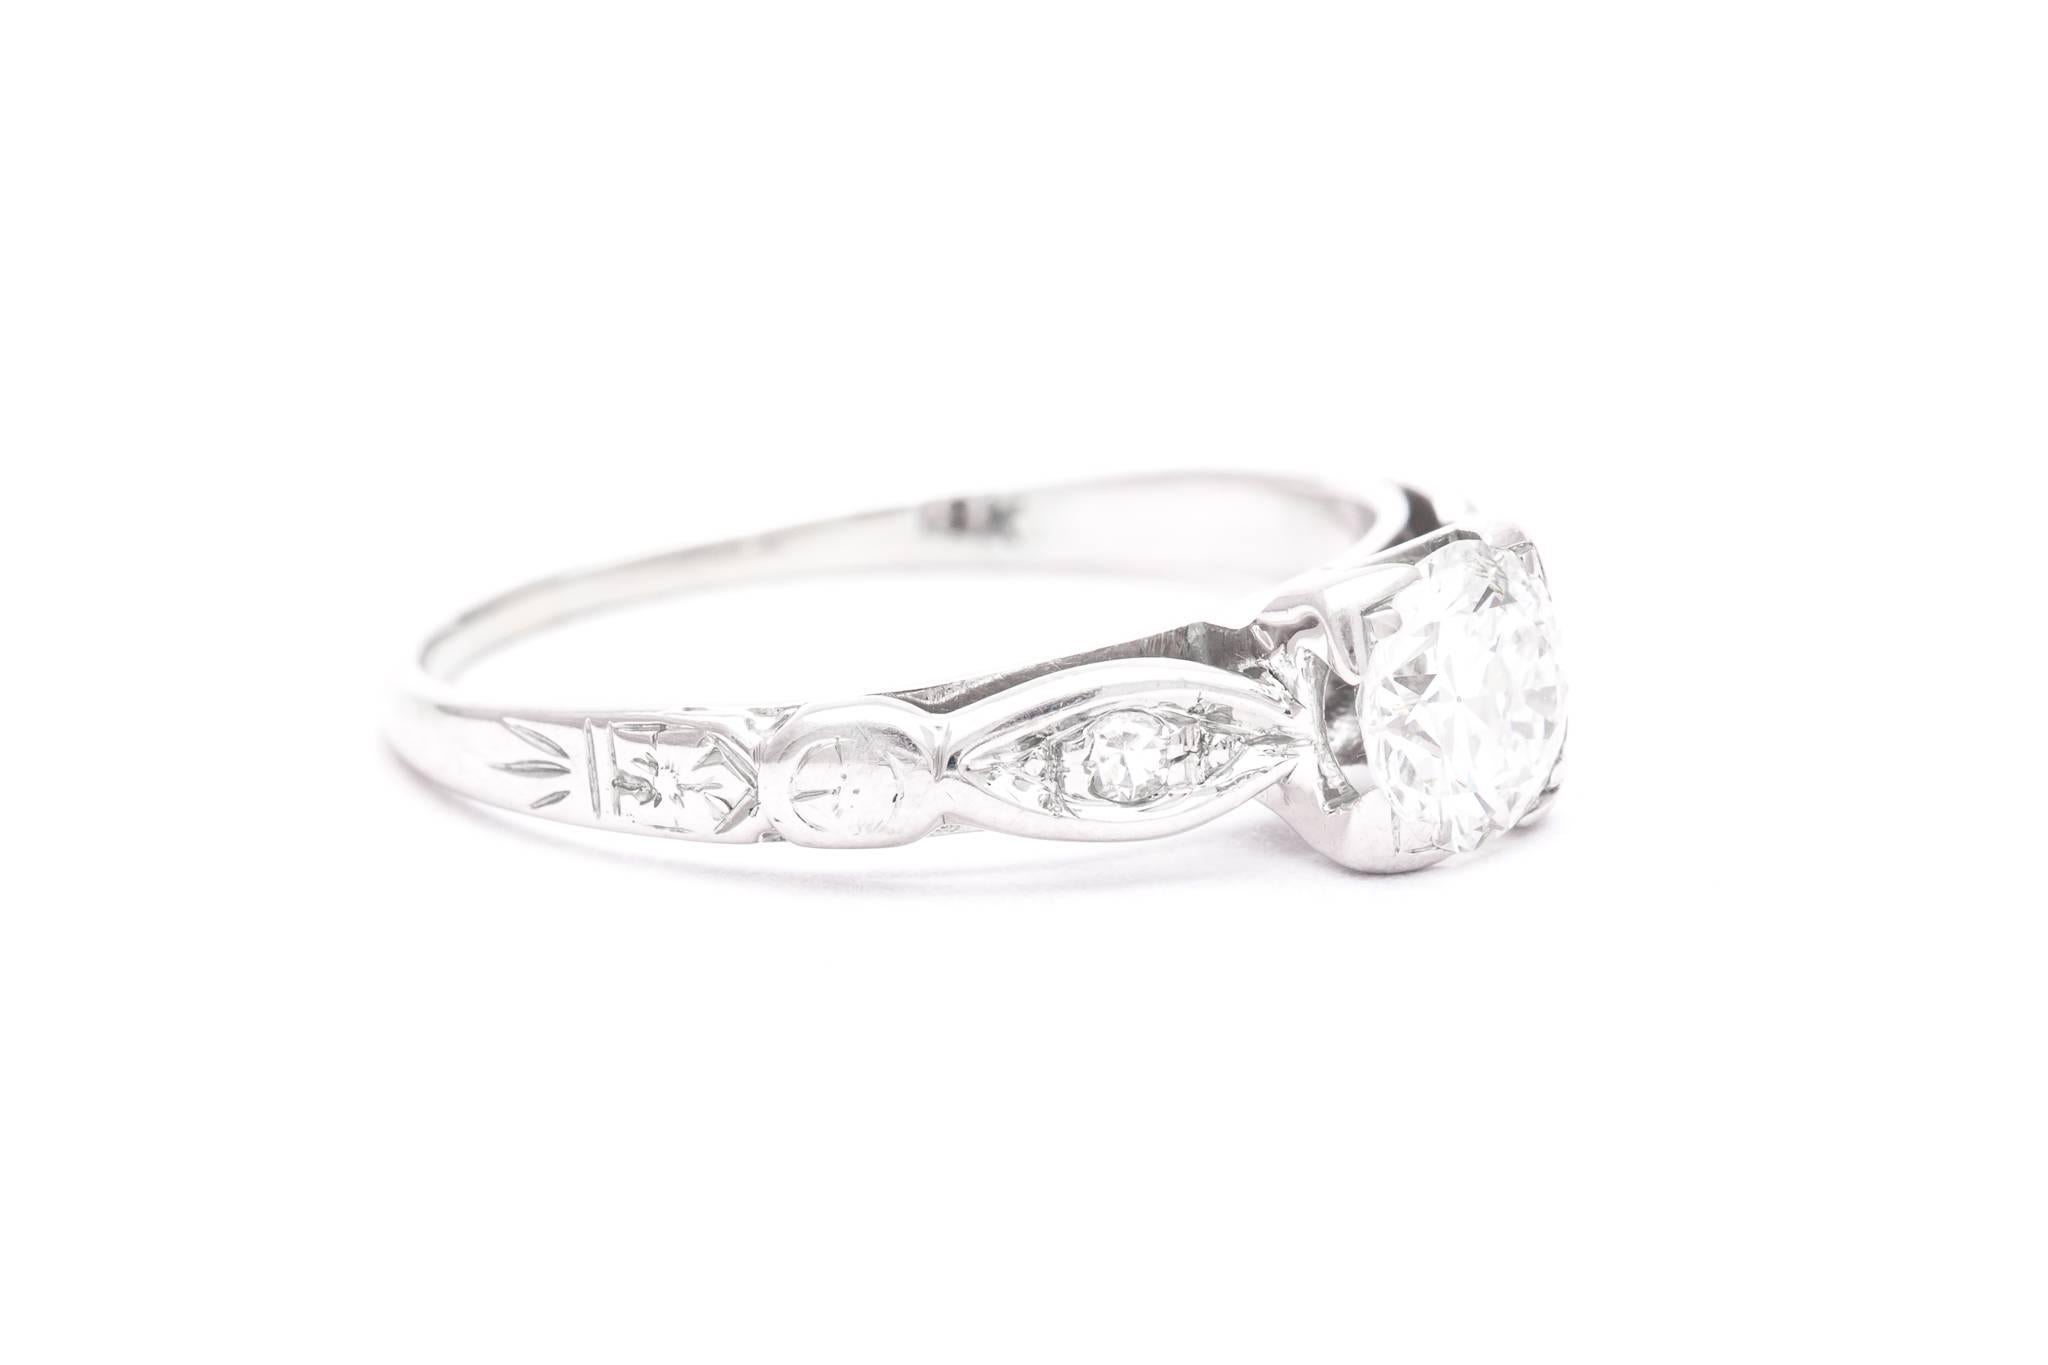 A beautiful mid century hand engraved diamond engagement ring in 18 karat white gold.  Centered by a 0.50 carat old European cut diamond this ring features a pair of accenting Swiss cut diamonds on either side of the center diamond giving the ring a